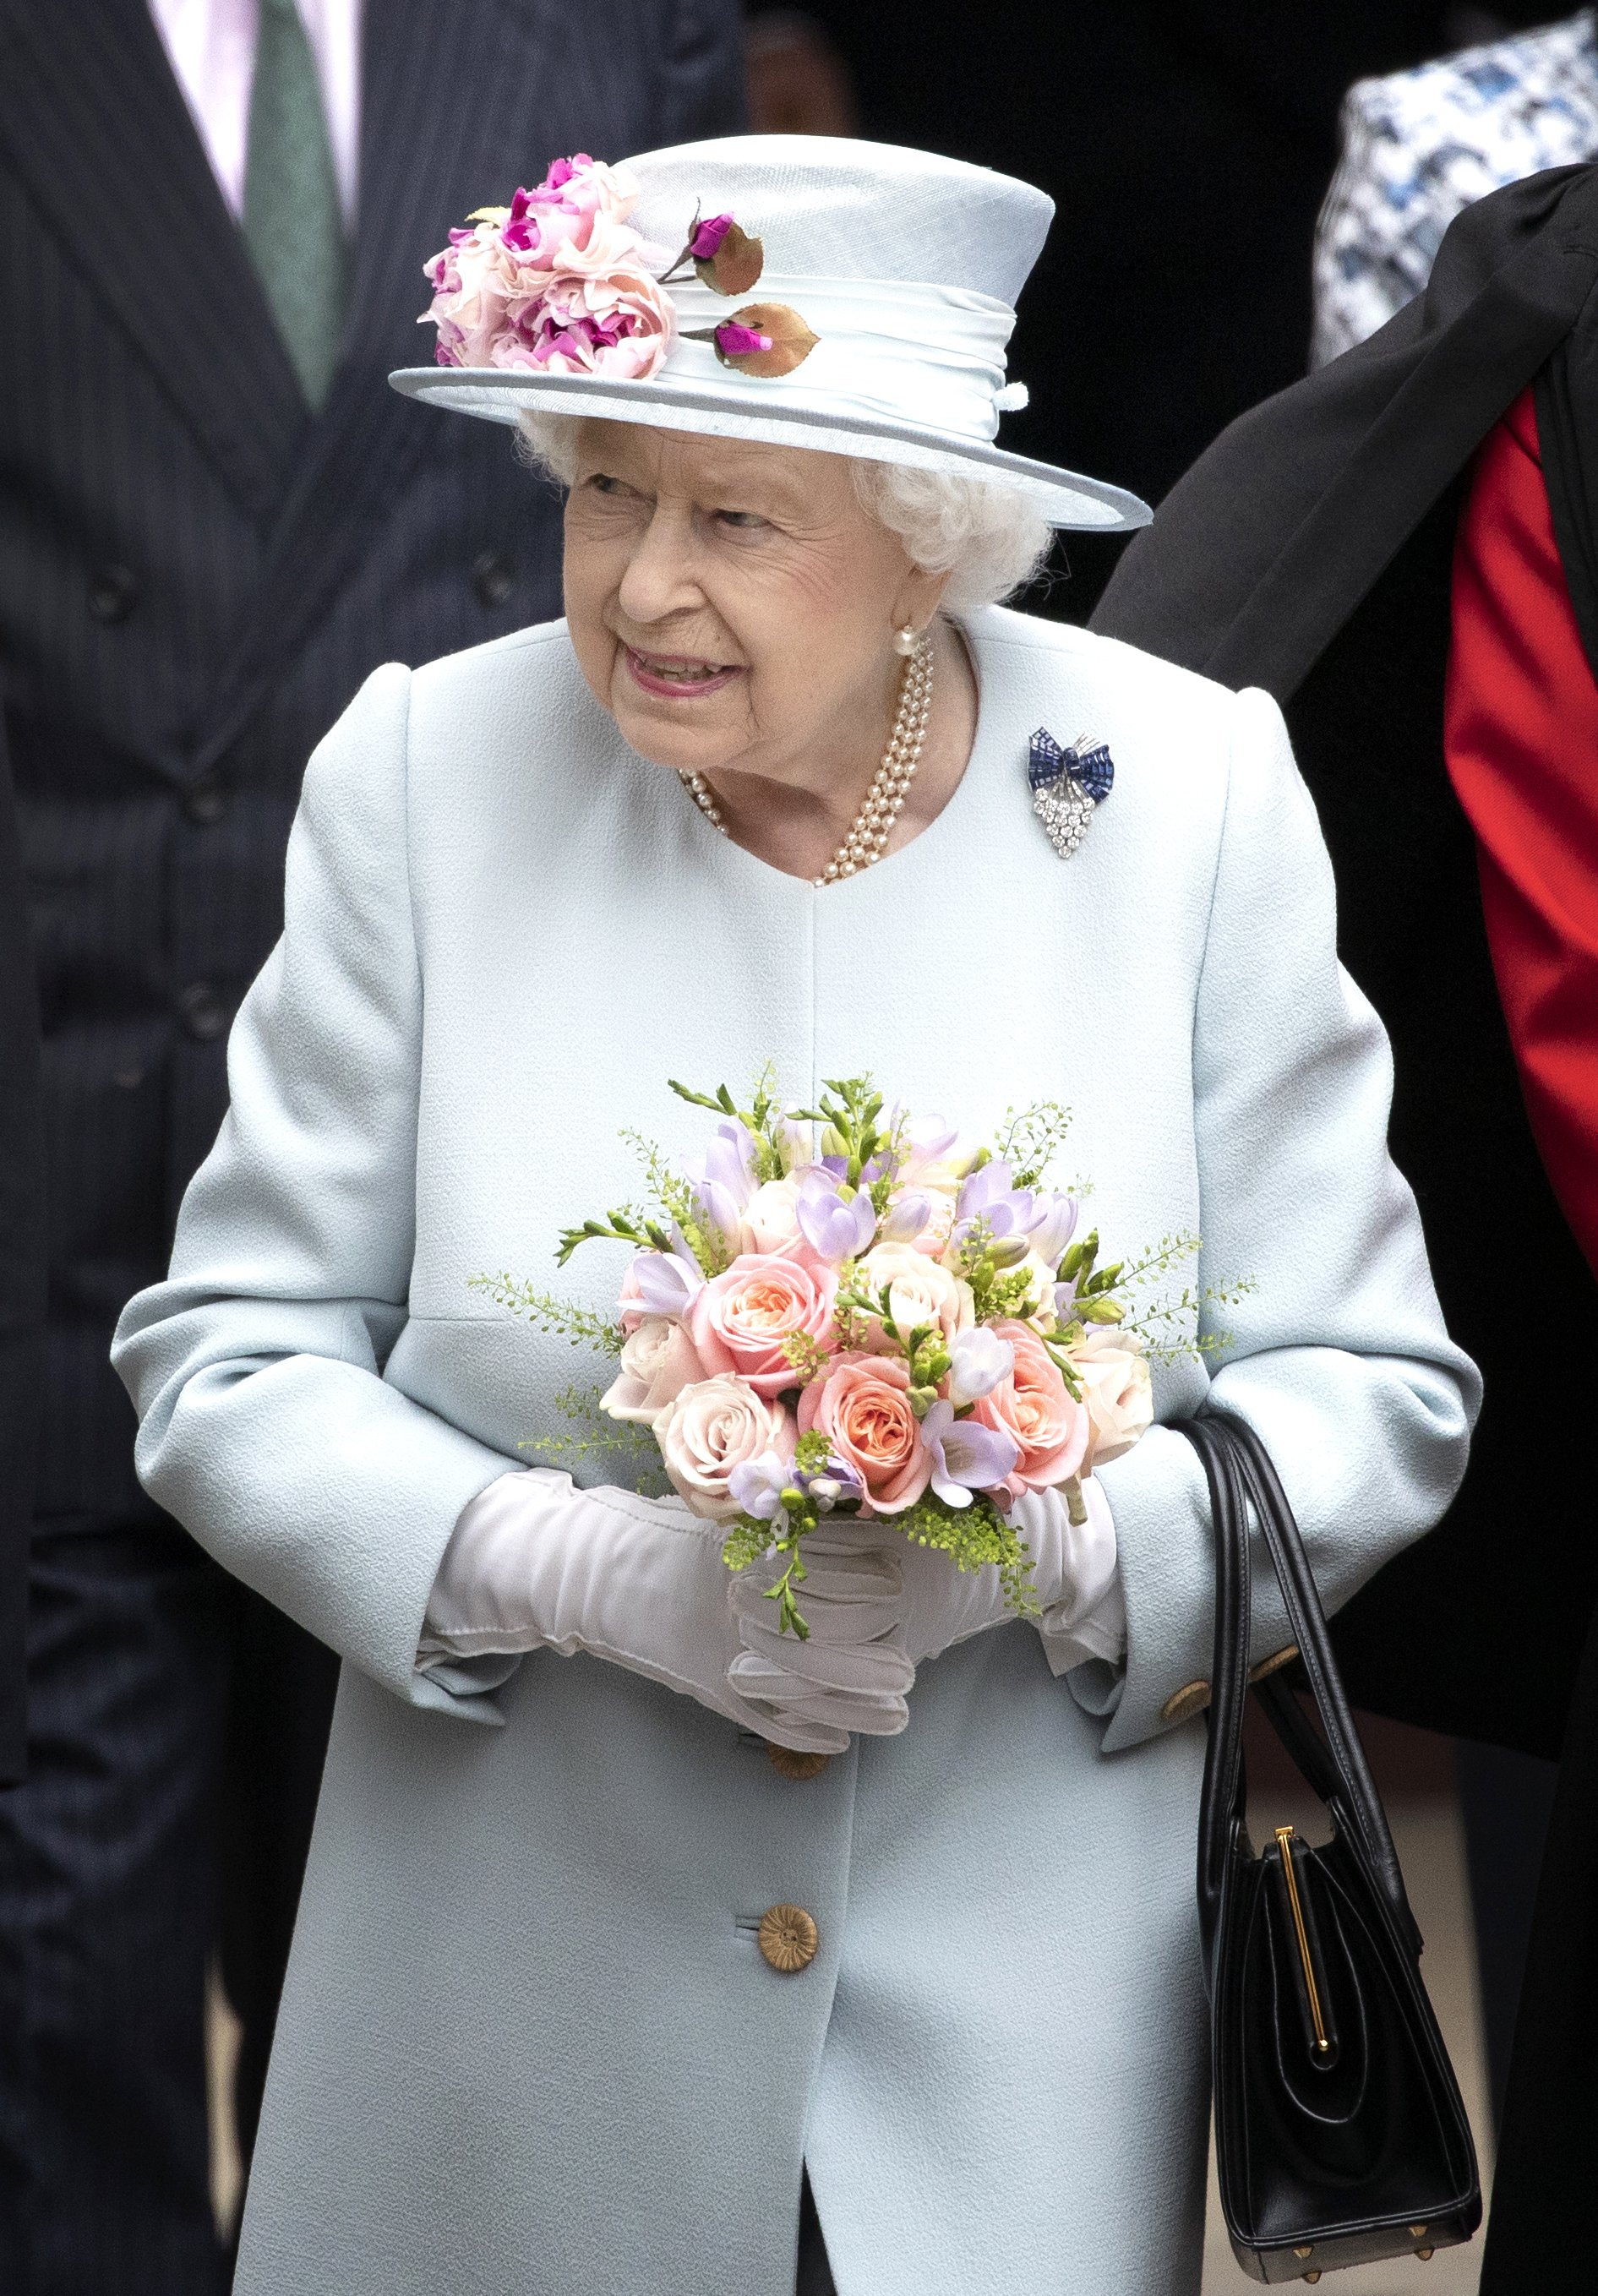 Queen Elizabeth II visits Canongate Kirk for church service in Edingburgh, Scotland on June 30, 2019 | Photo: Getty Images